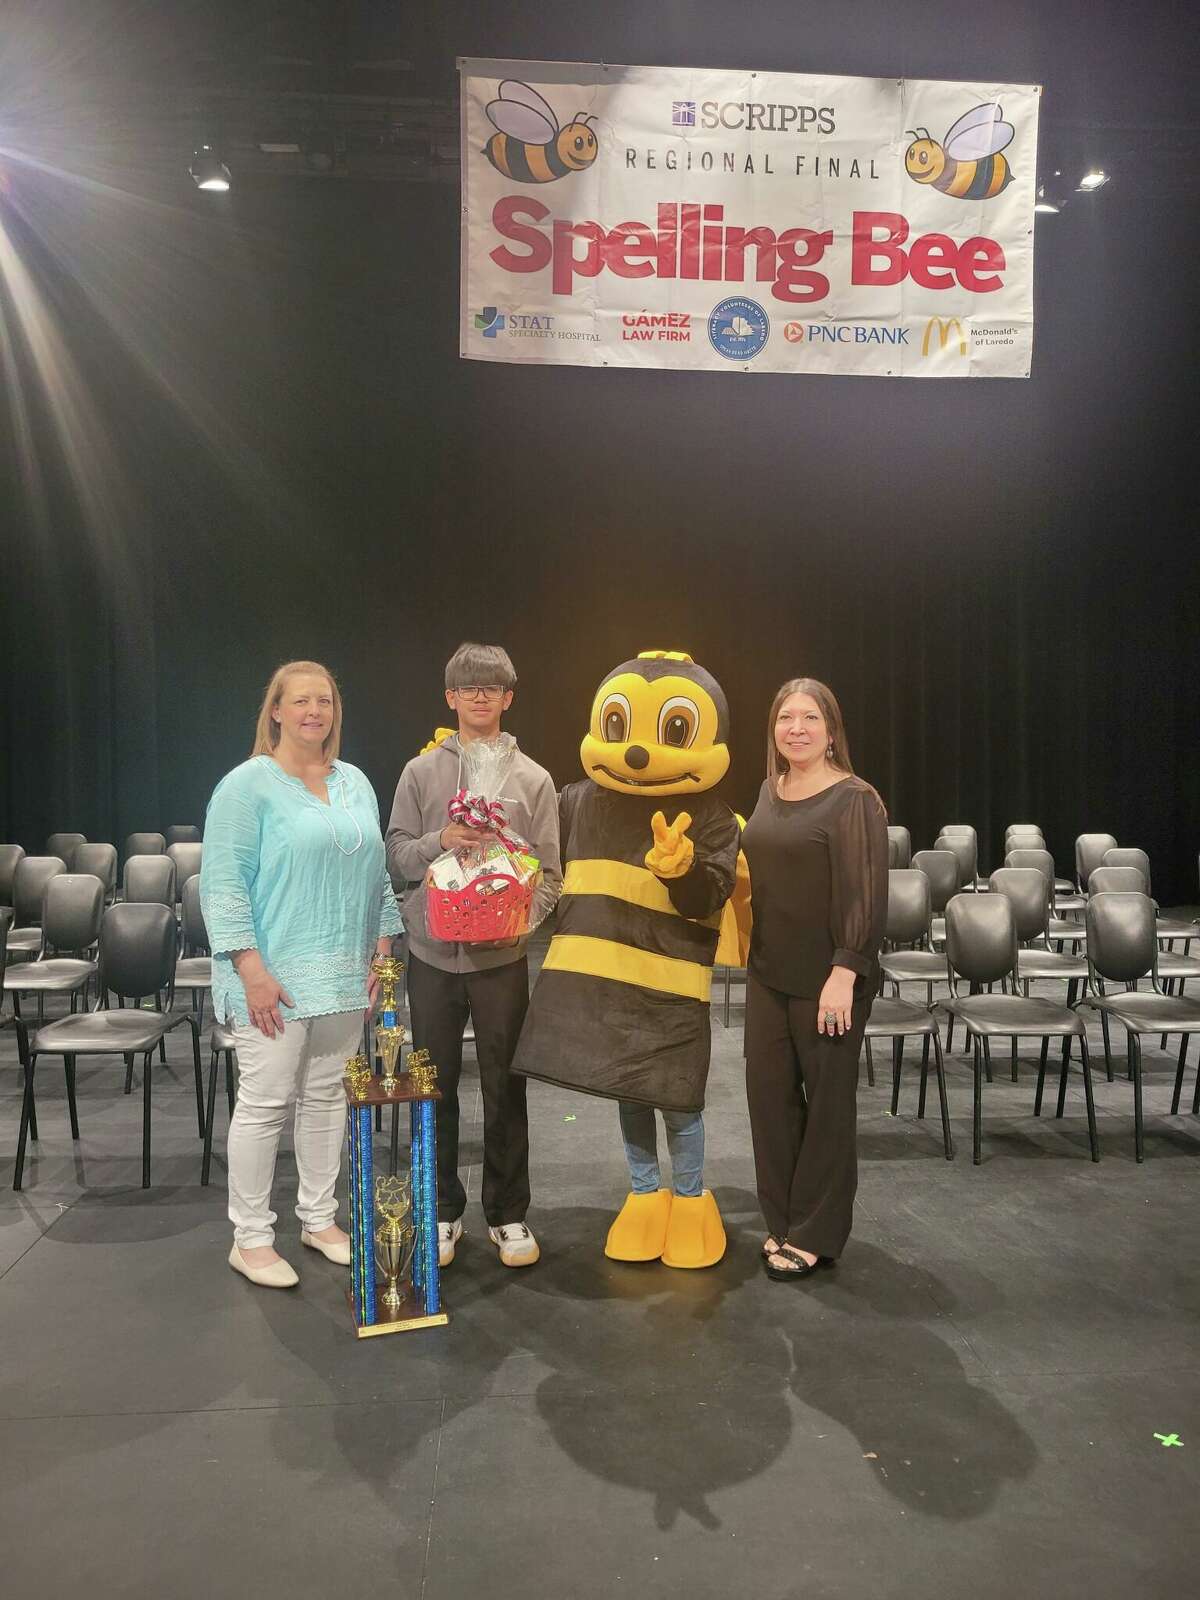 Nathaniel Rimocal wins 2nd straight Regional Spelling Bee in Laredo